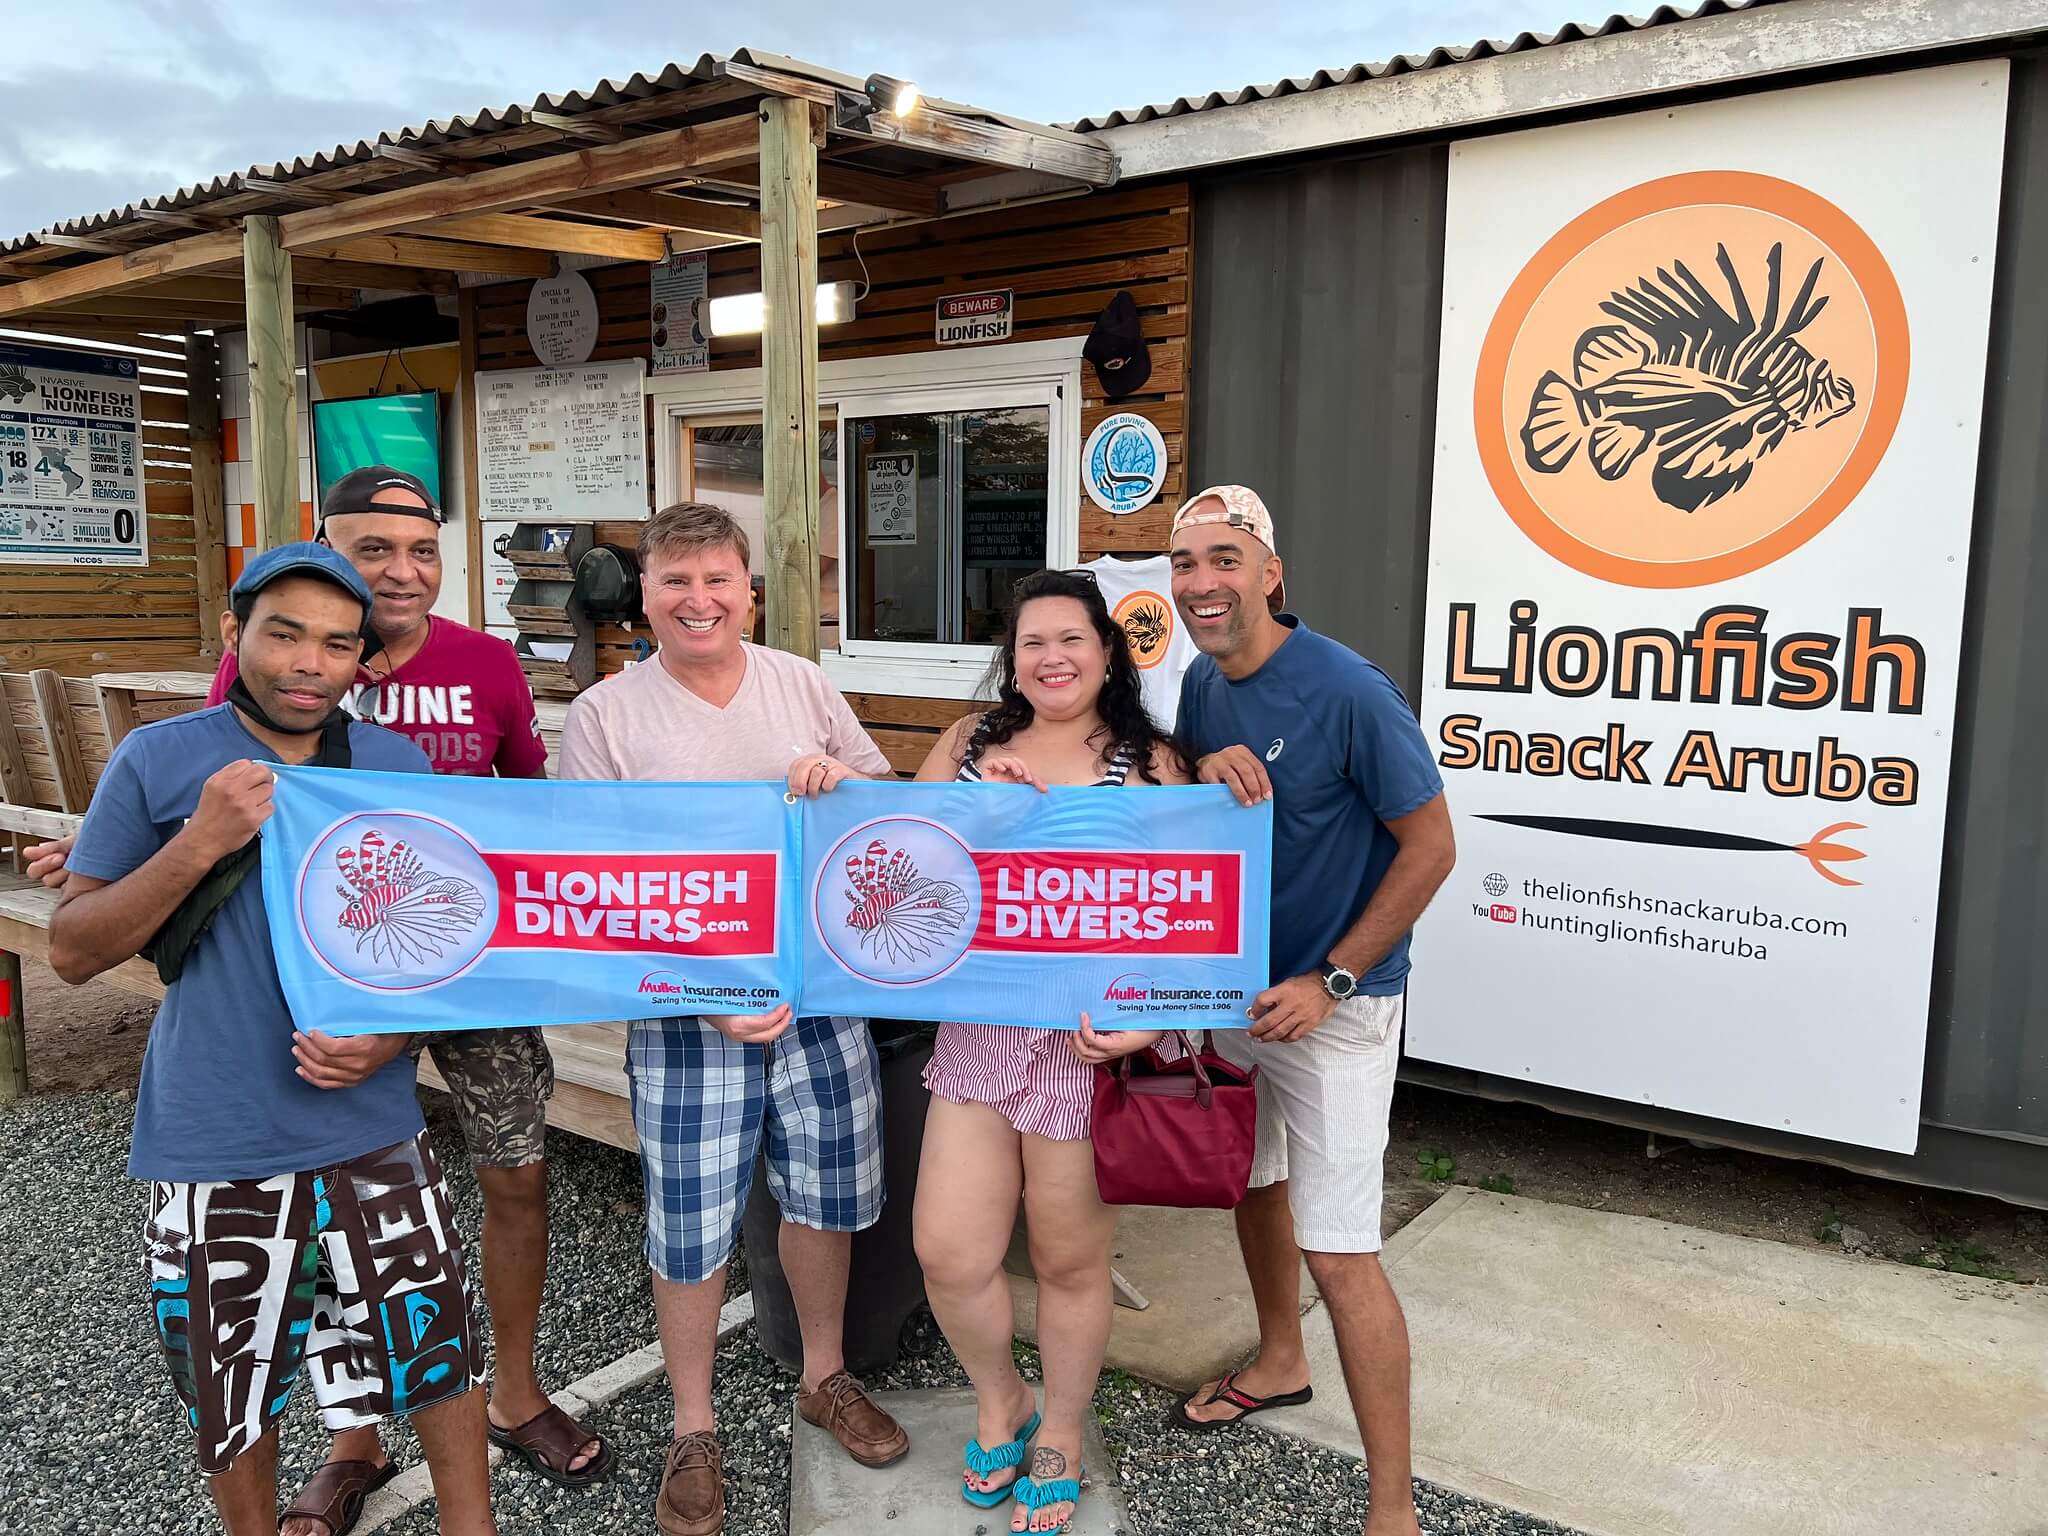 Group of Lionfish Divers supporters in Aruba